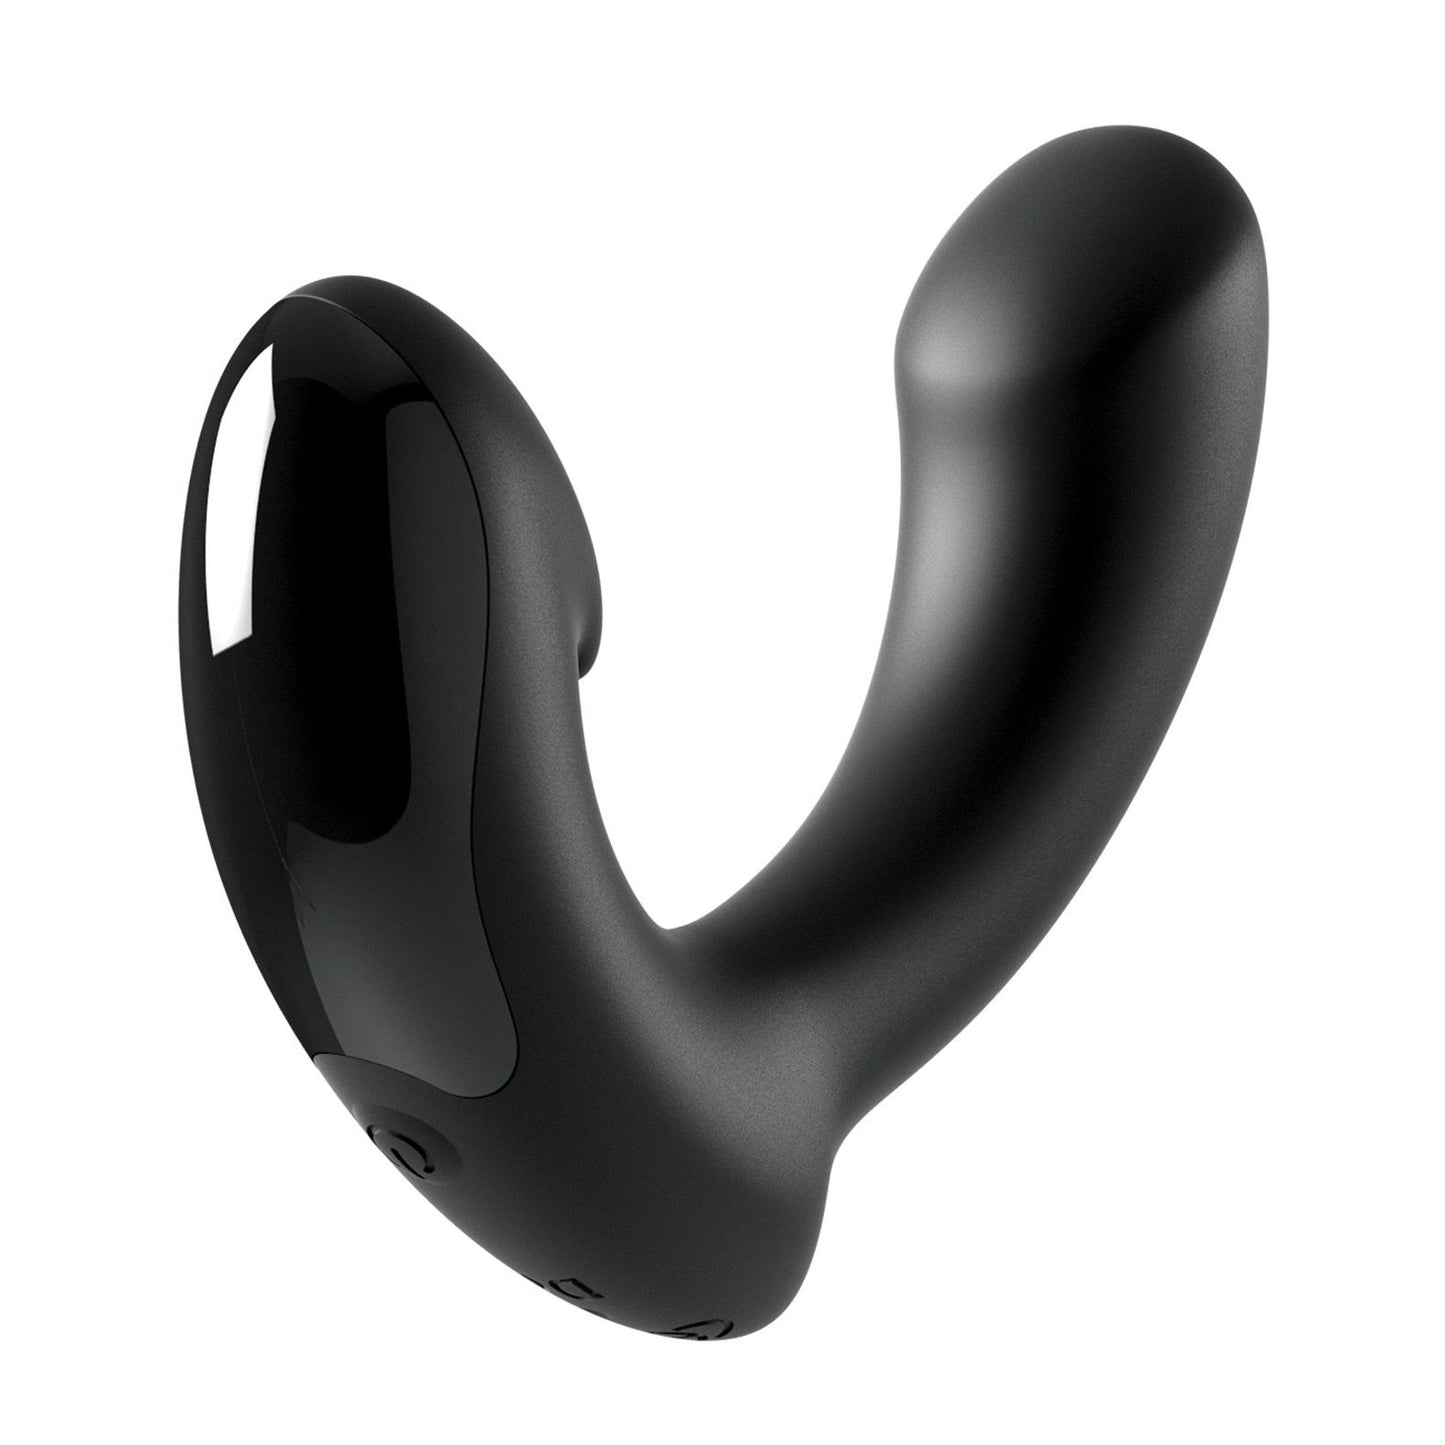 Sir Richards Control Silicone P-Spot Massager